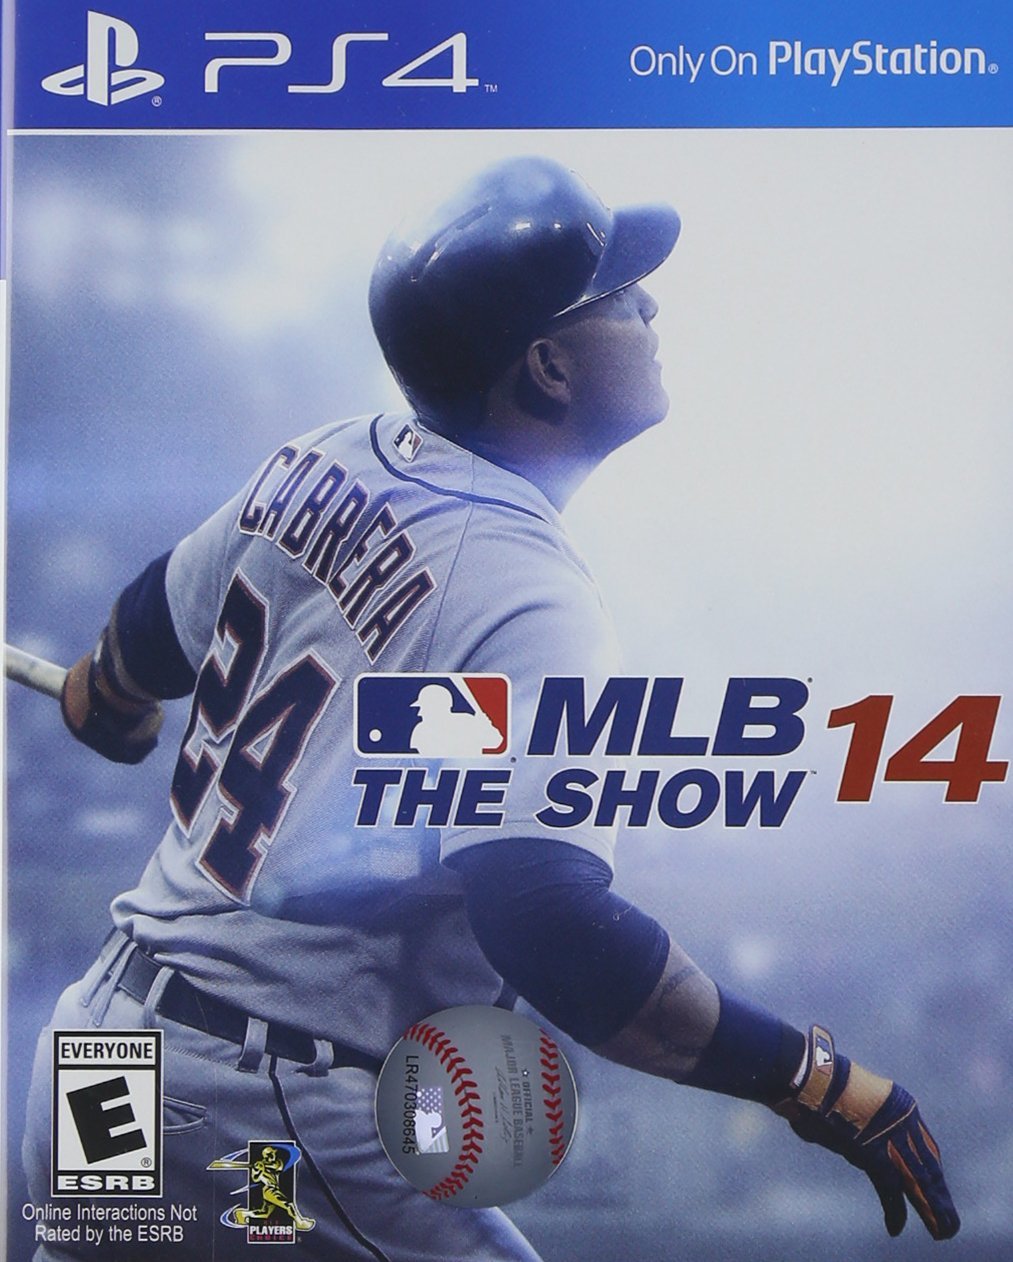 Mlb 14 the Show PS4